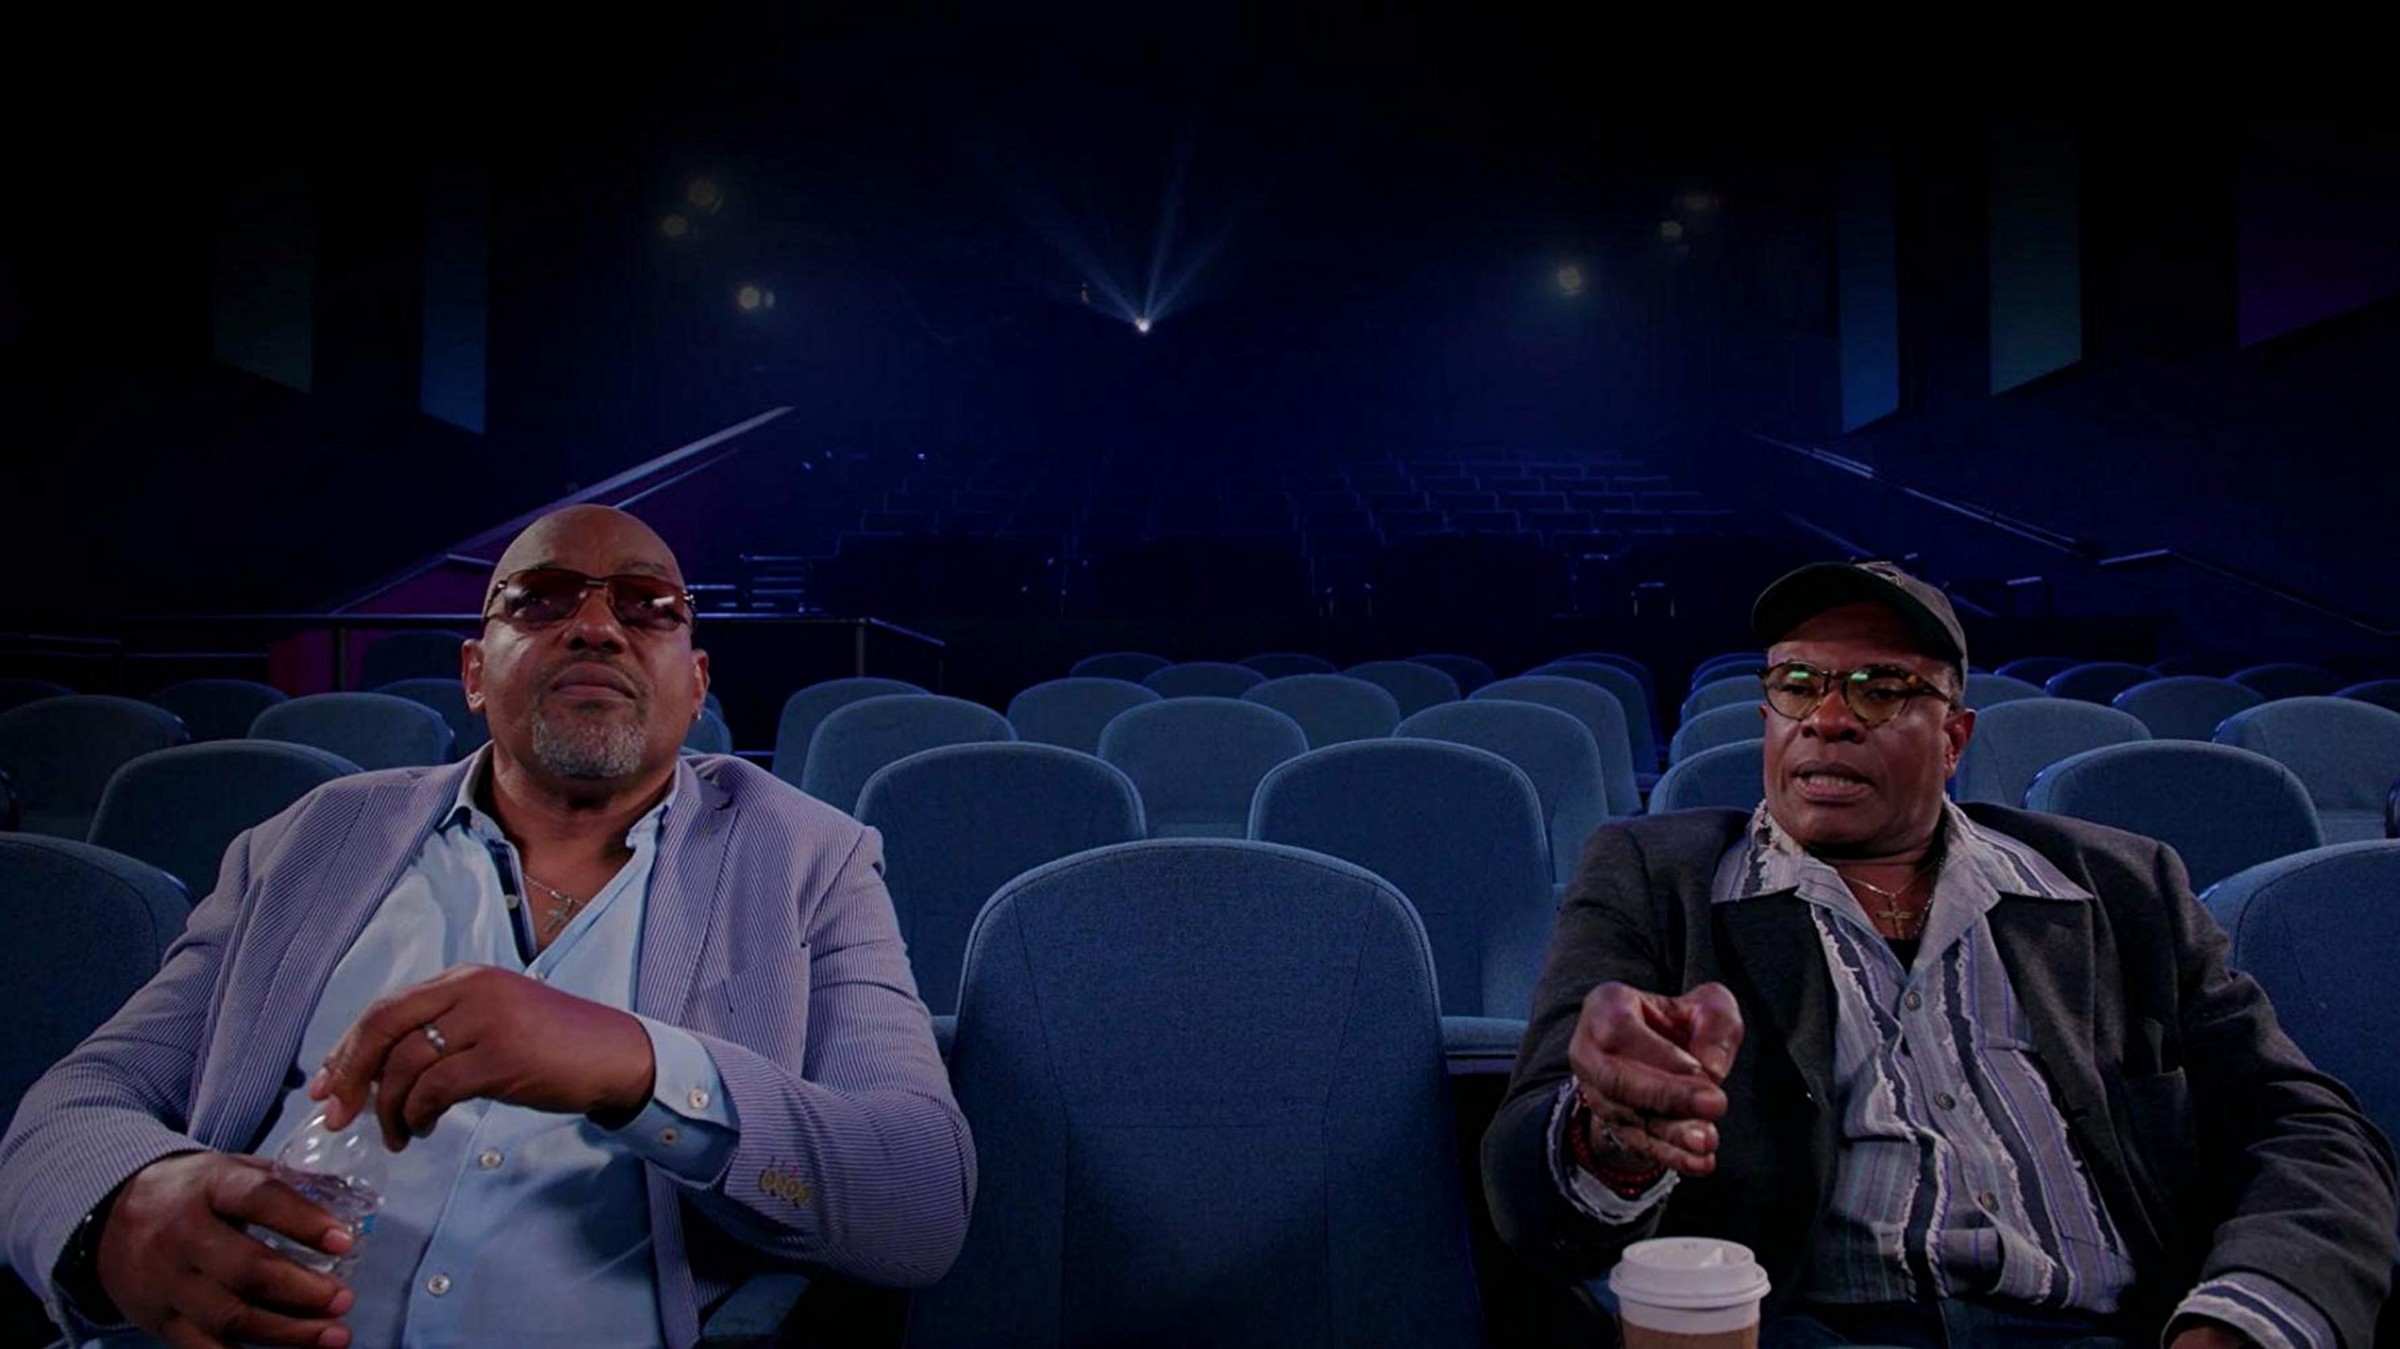 Keith David and Ken Foree (both Black men and prominent actors from horror films) sit in a movie theatre